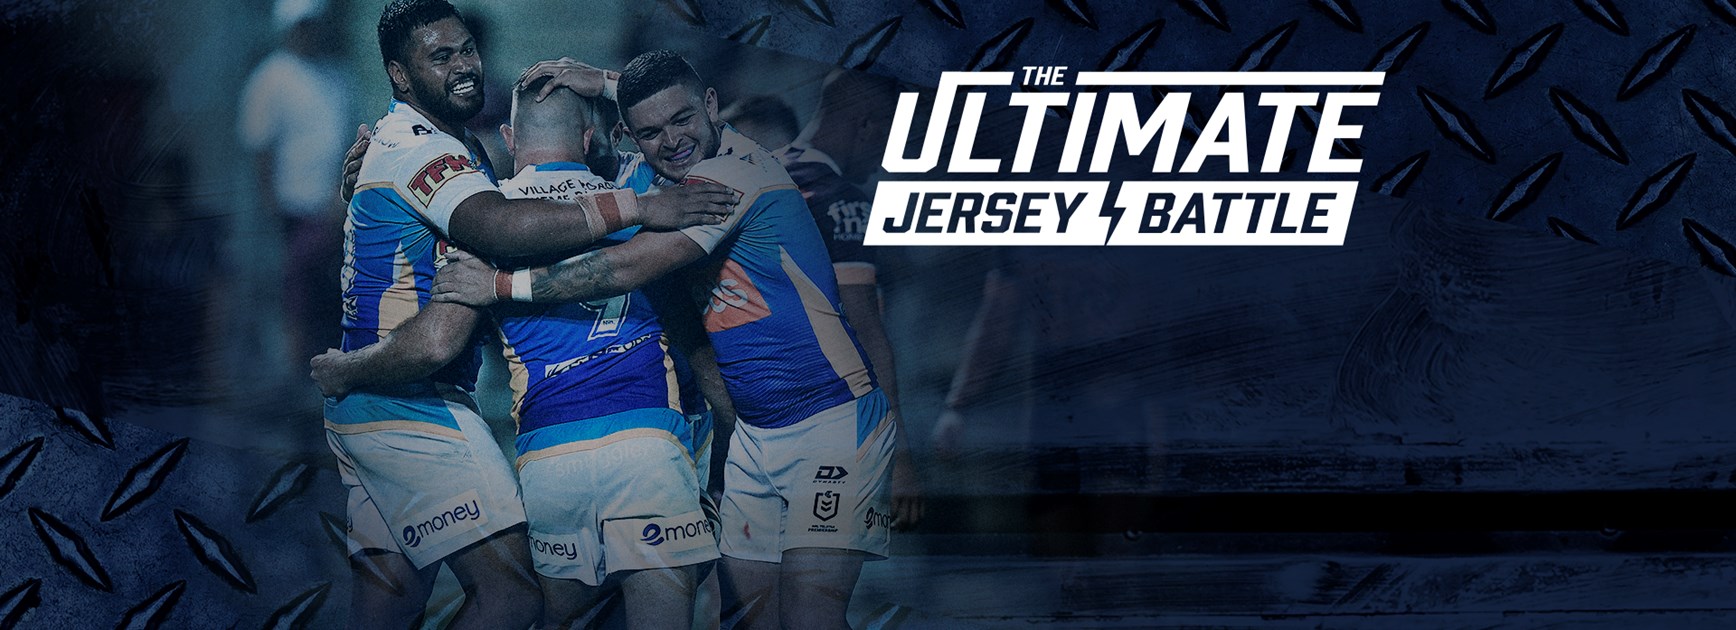 GAME 3: Voting Now Open In Titans Jersey Battle